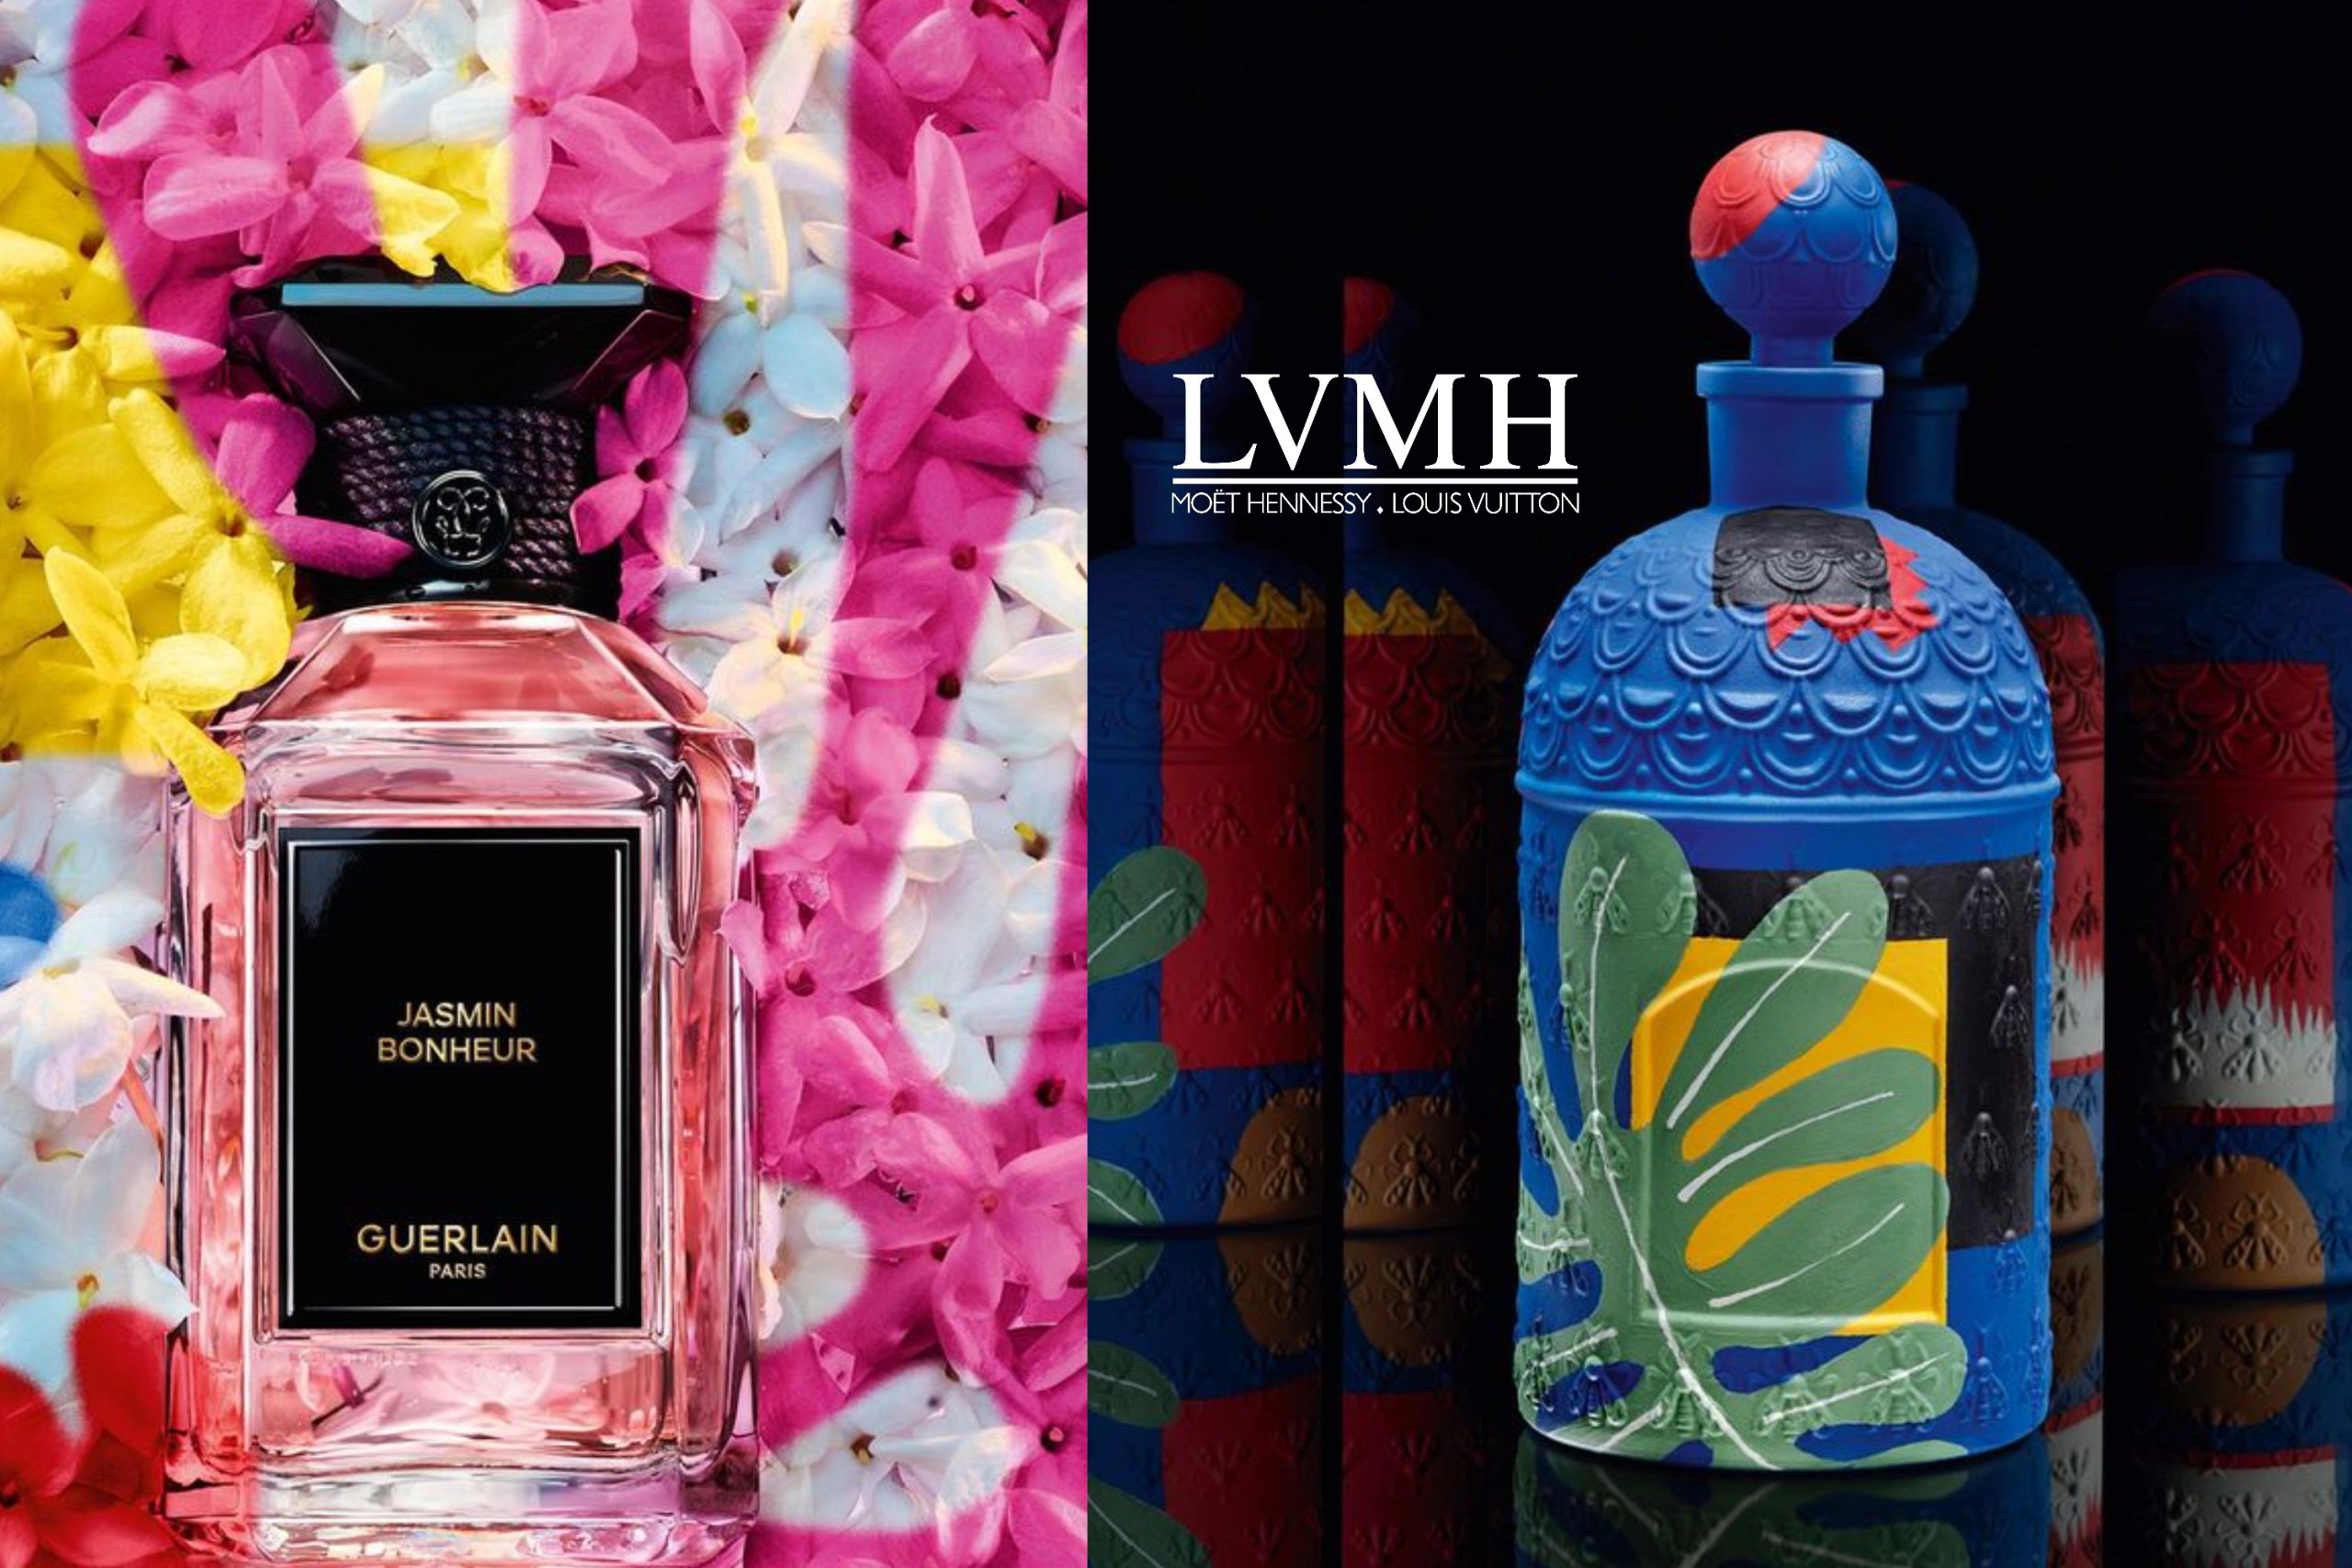 Watch: LVMH Maisons are always sharing their artistic vision. Discover Guerlain x Maison’s and The Art of Happiness.